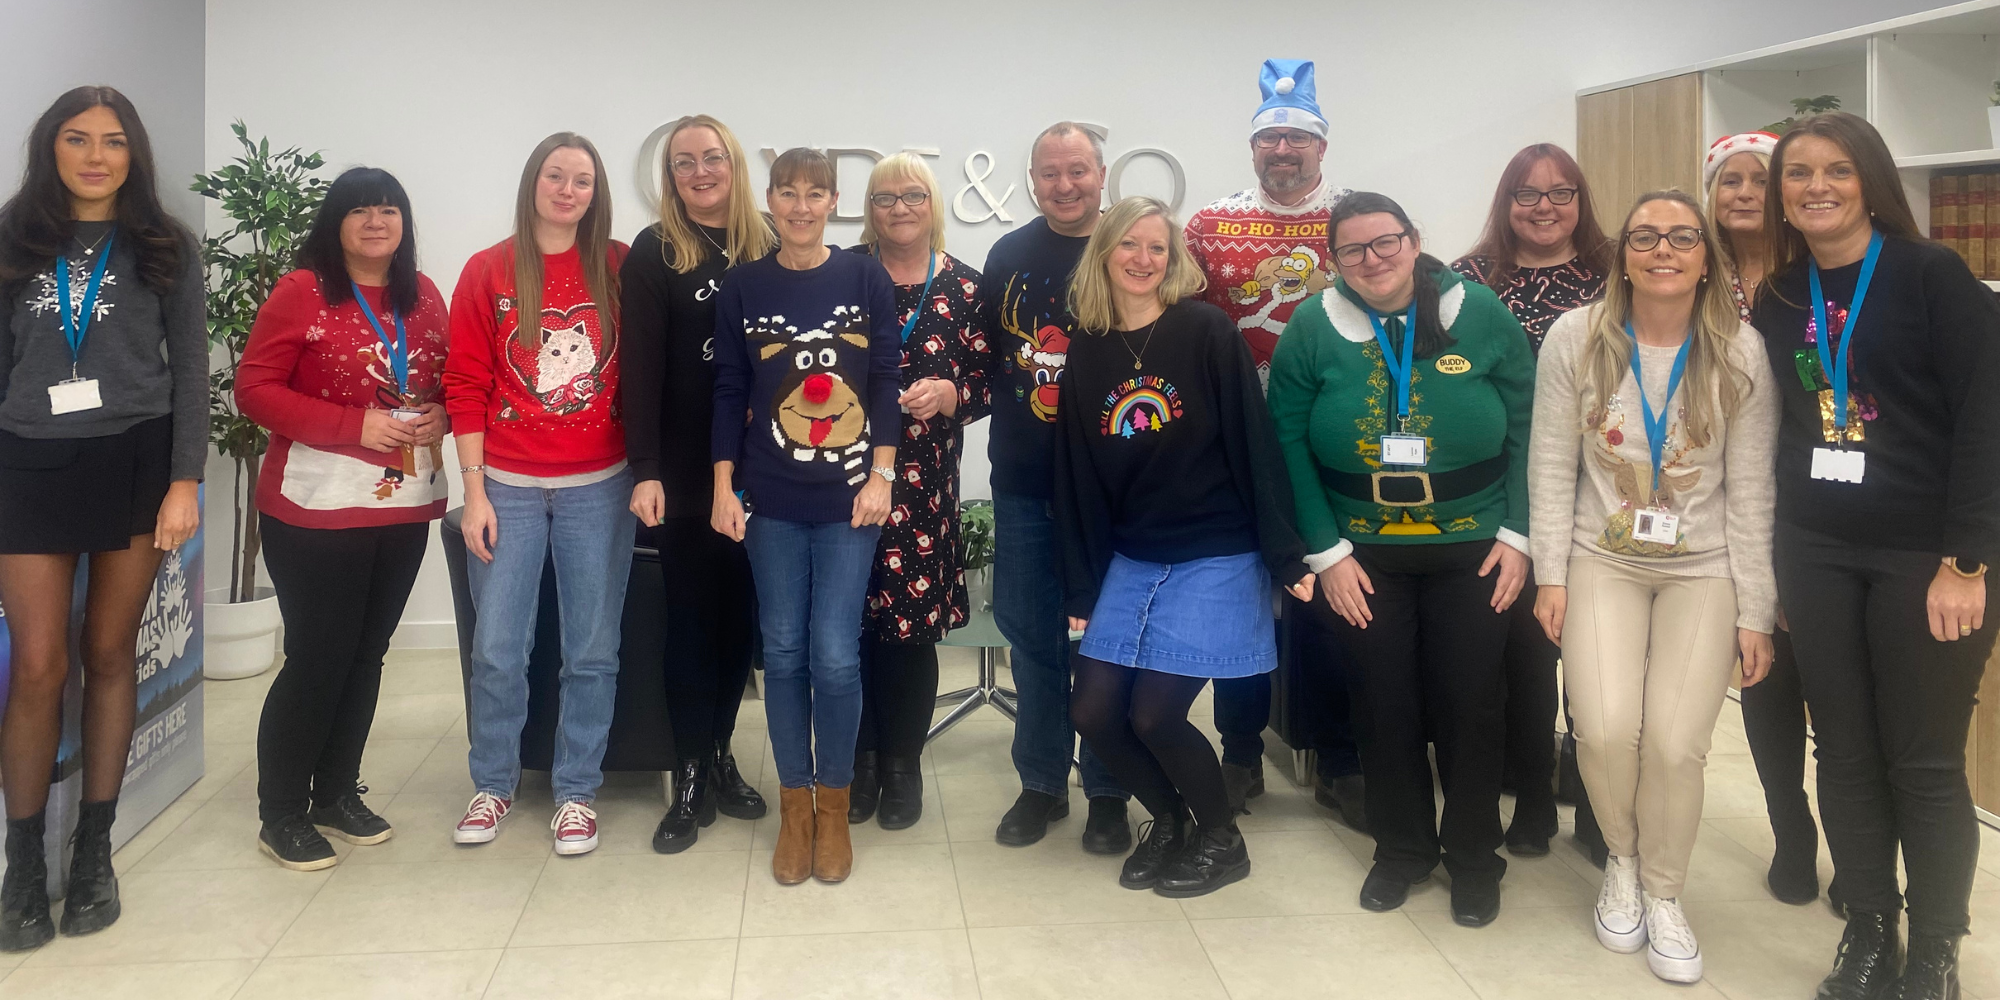 Clyde & Co Scotland supports eight charities this winter